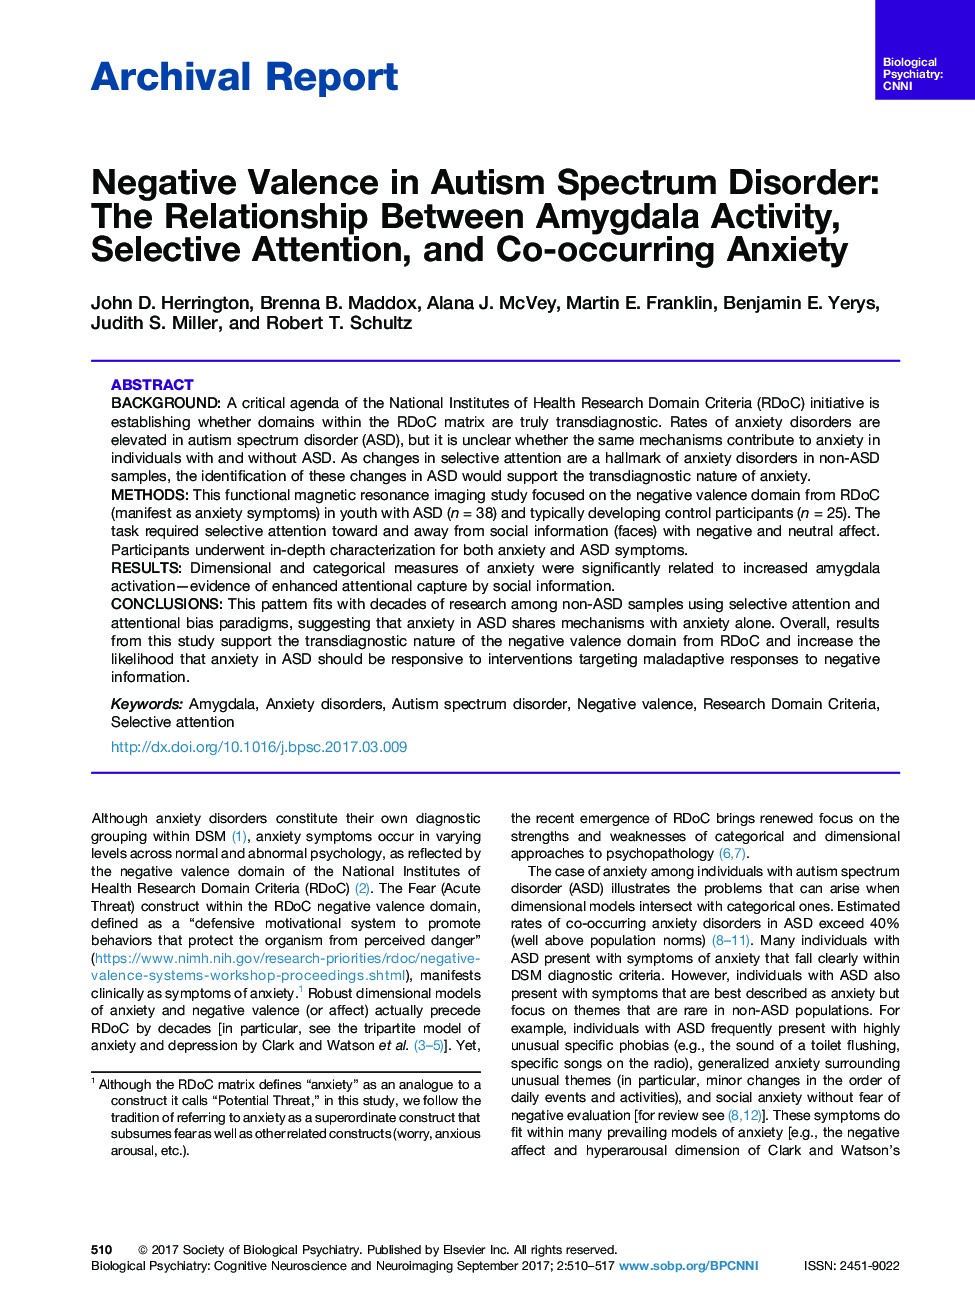 Archival ReportNegative Valence in Autism Spectrum Disorder: The Relationship Between Amygdala Activity, Selective Attention, and Co-occurring Anxiety